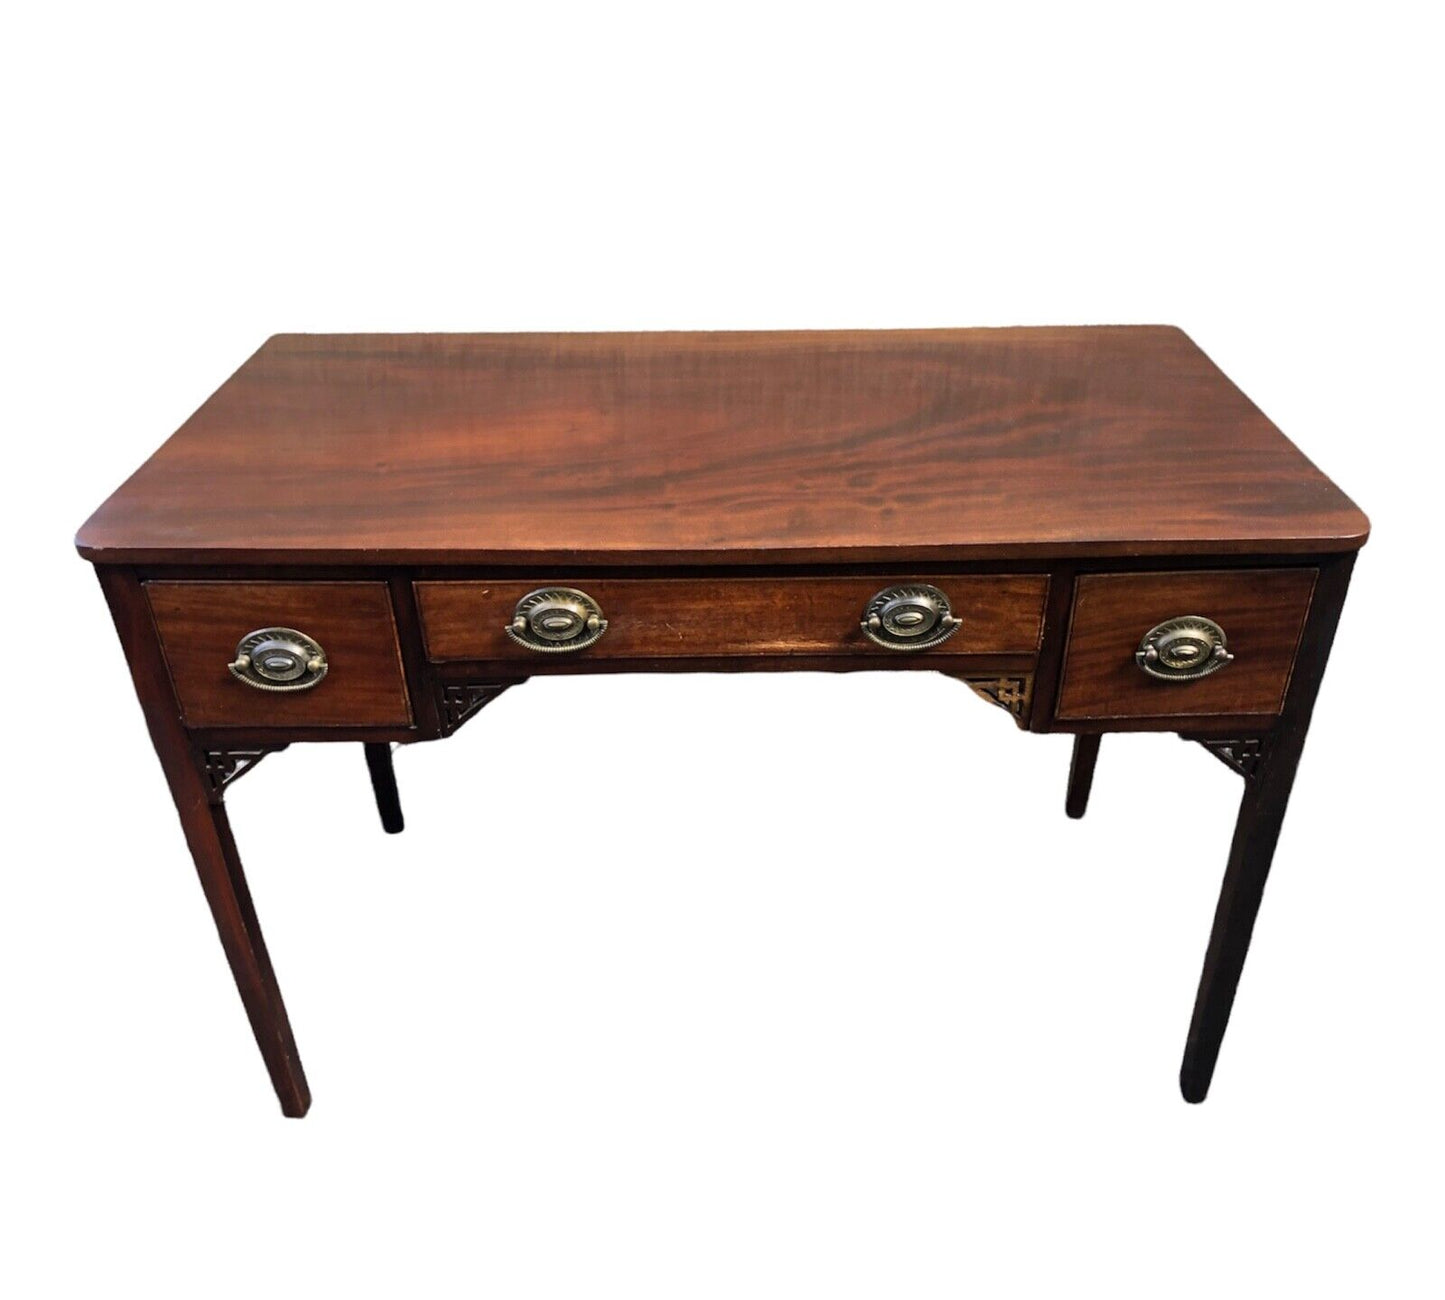 000920....Handsome Antique Mahogany Writing Or Hall Table ( sold )